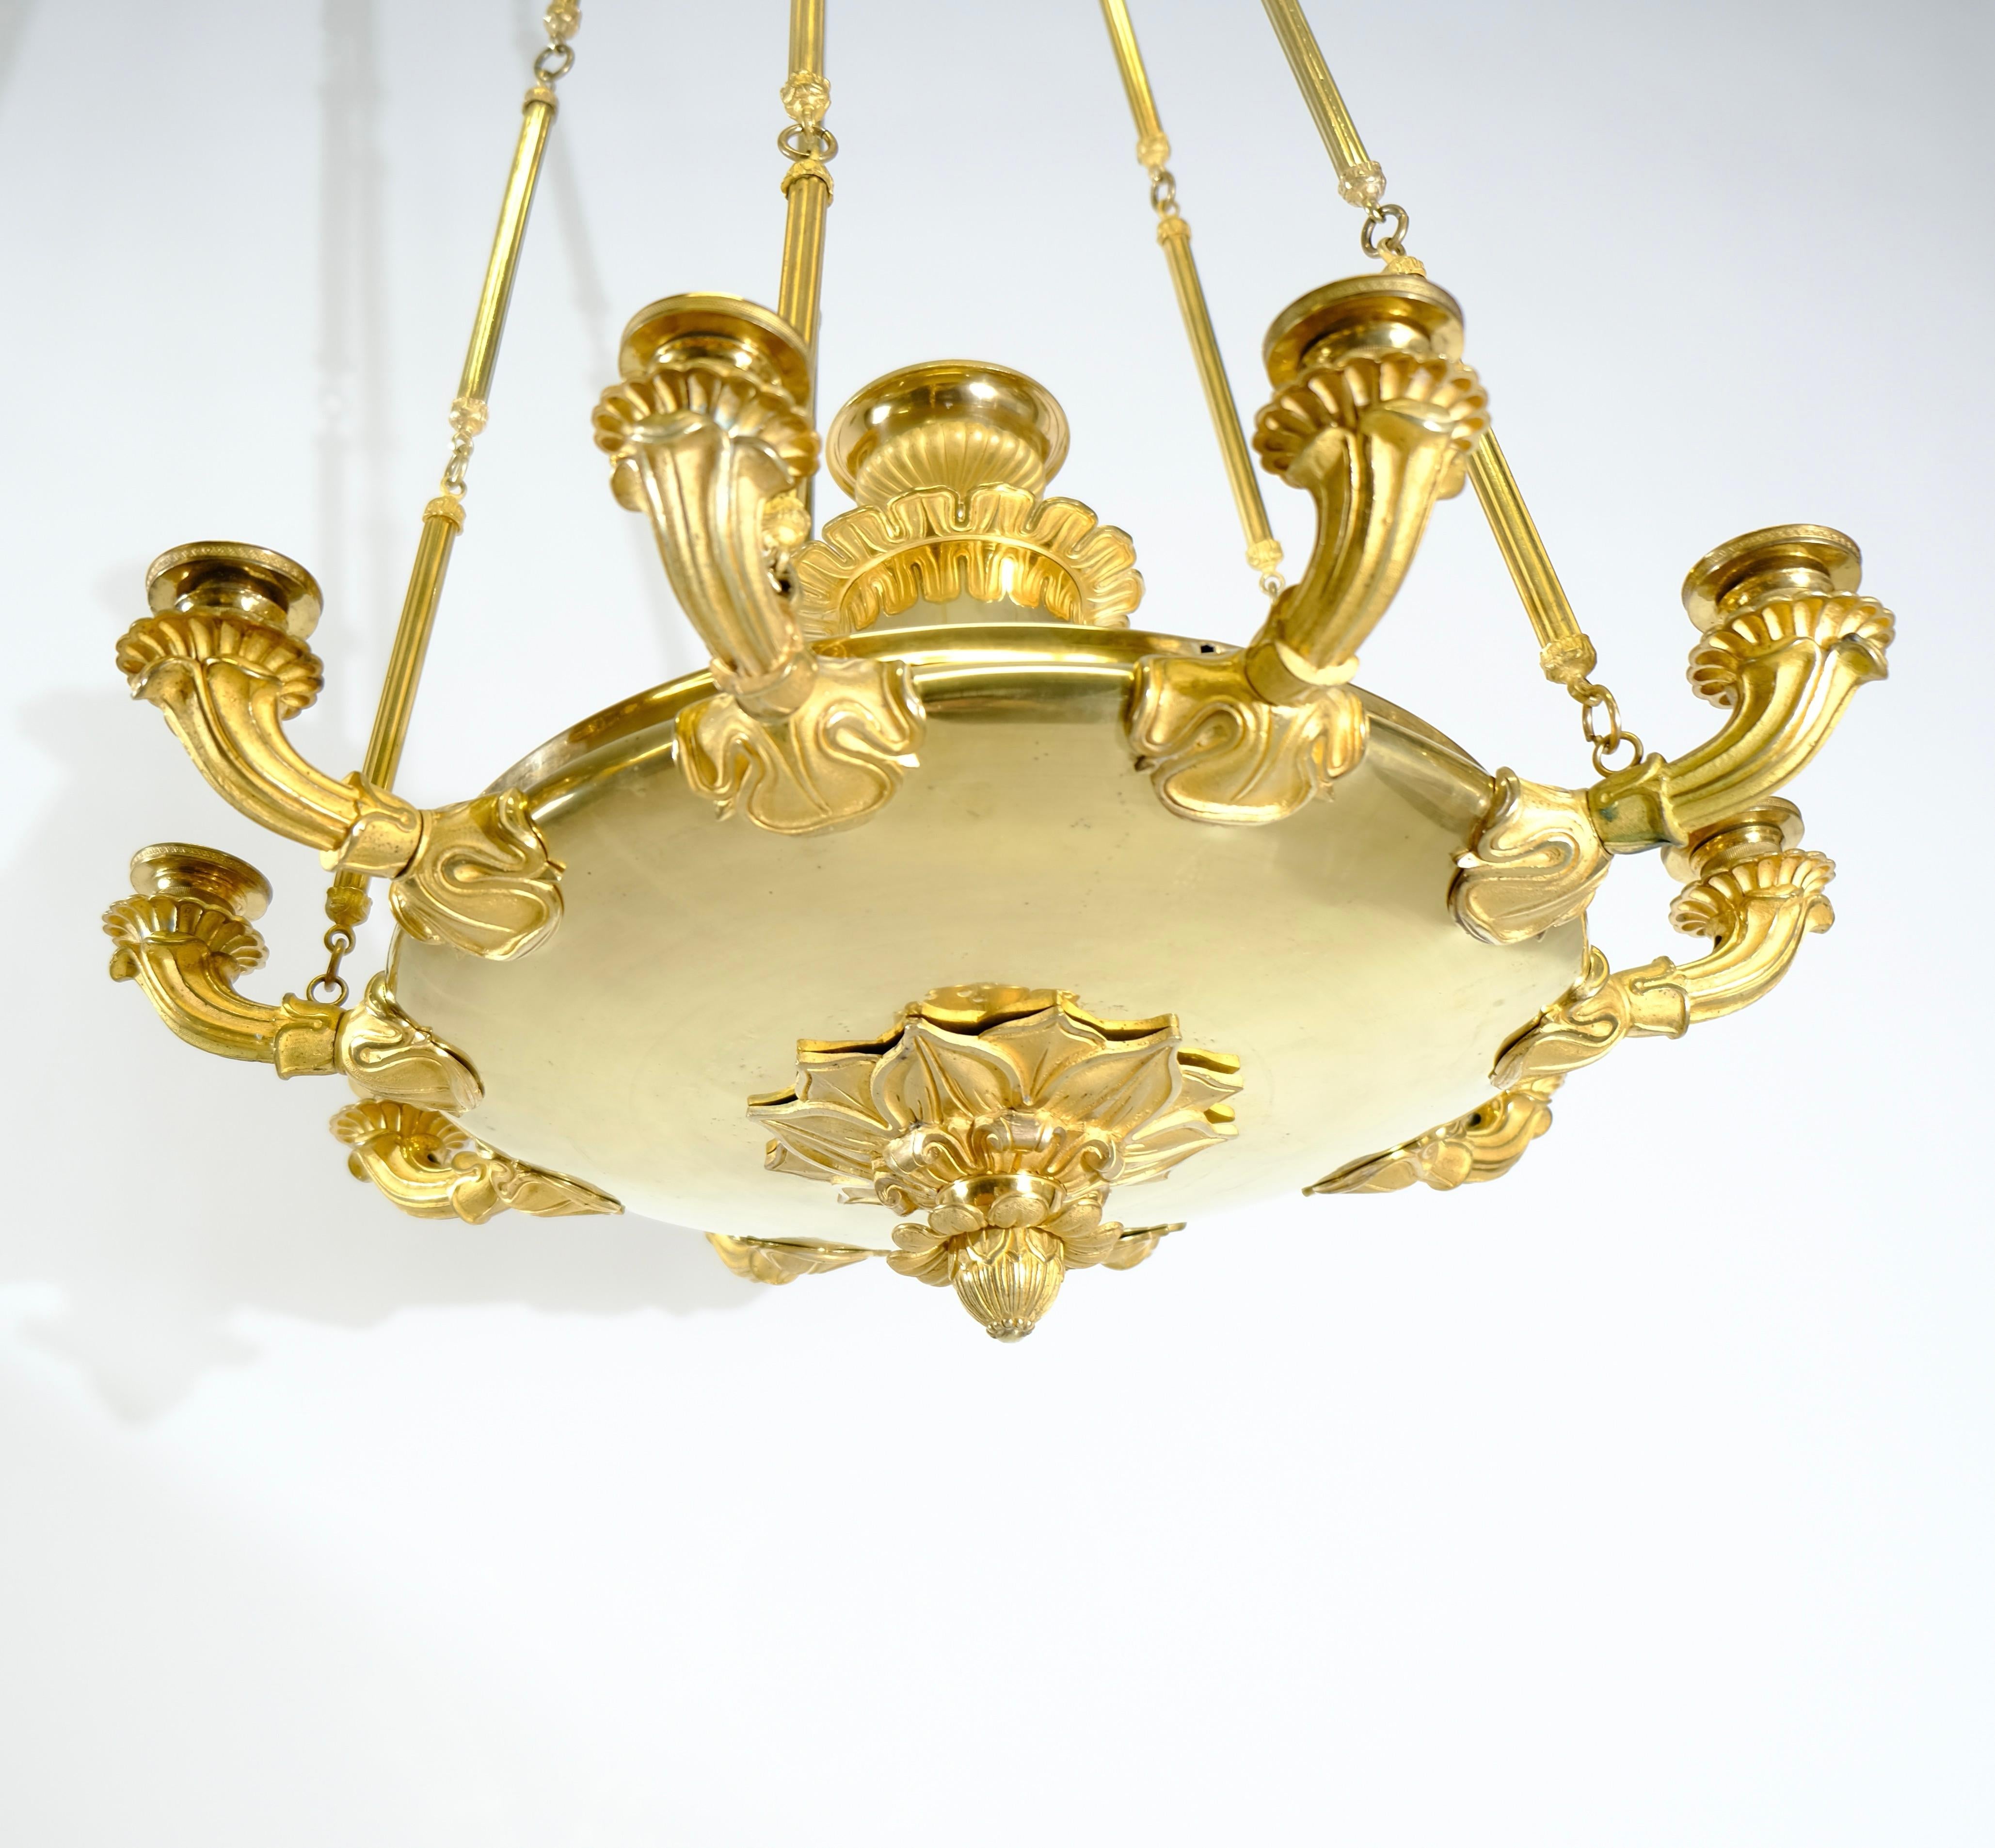 Large Empire Chandelier with Ten Candleholders in great condition. Ca 1820. For Sale 4